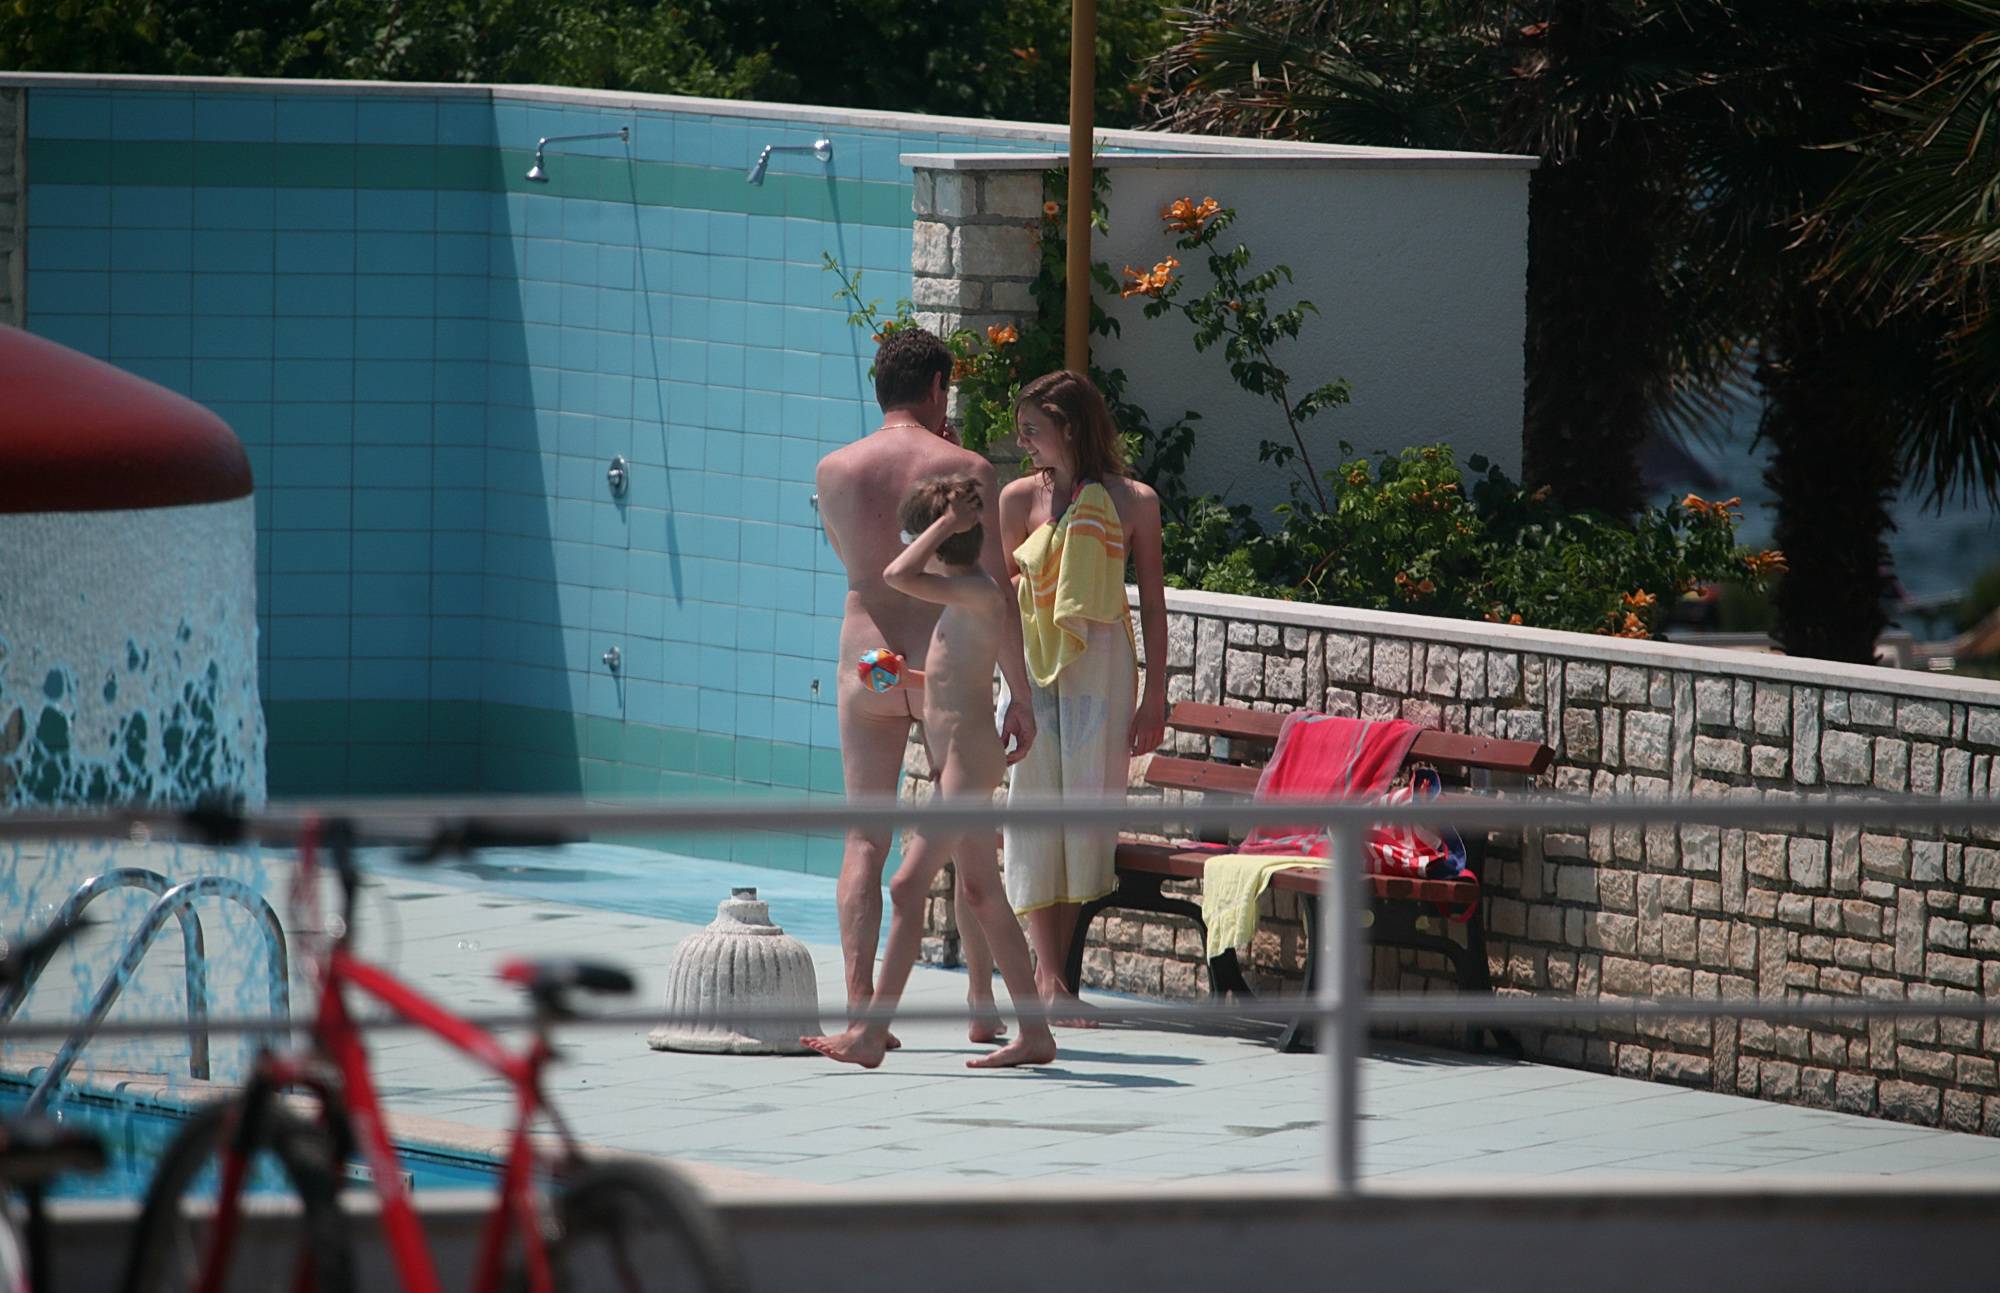 Pure Nudism Pics-Poolside Family Walkers - 4